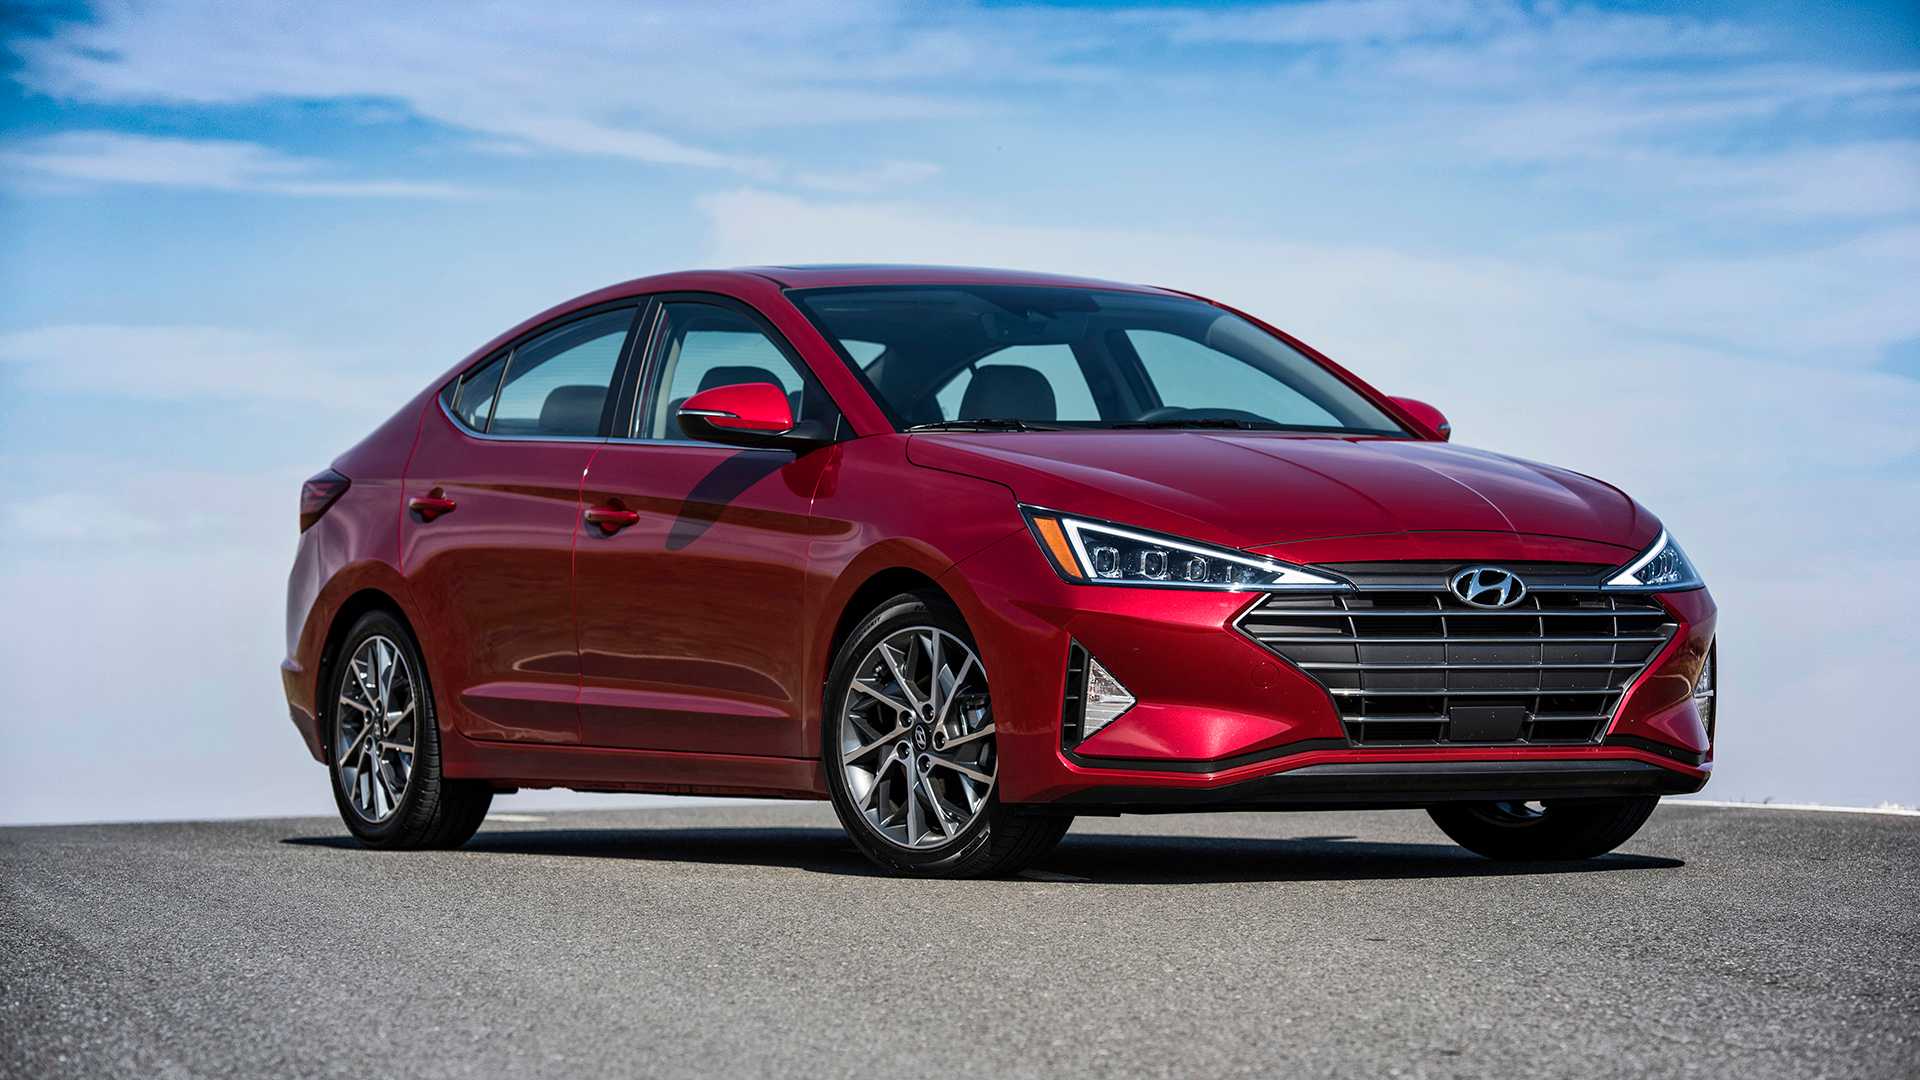 Hyundai Elantra to Launch in Pakistan - Take a Look at the Important Details